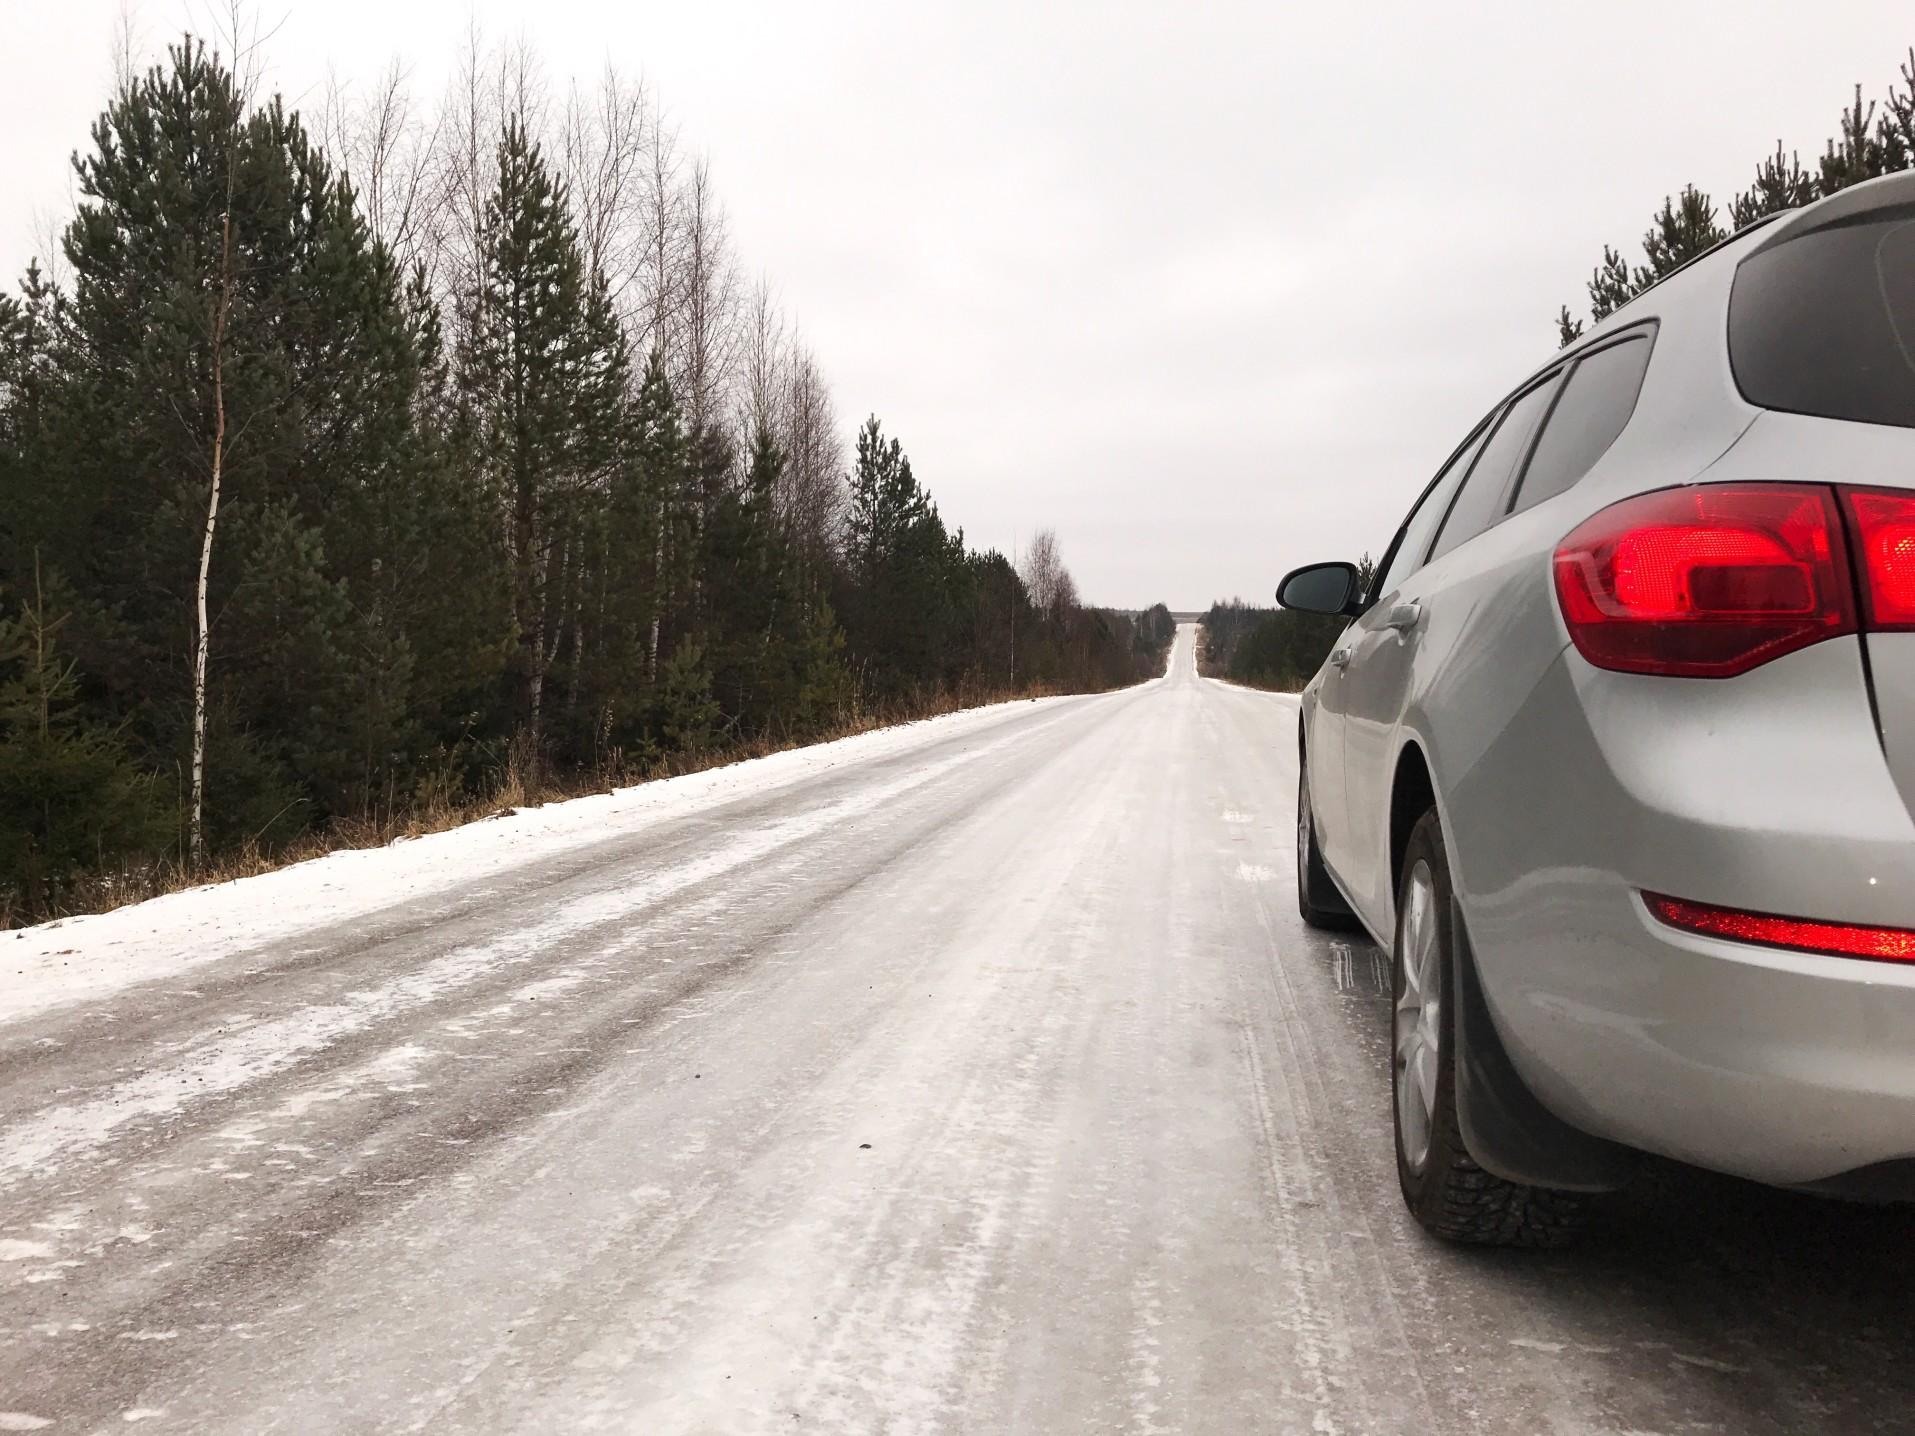 For winter driving, some vehicles are better than others when it comes to safety and comfort.  